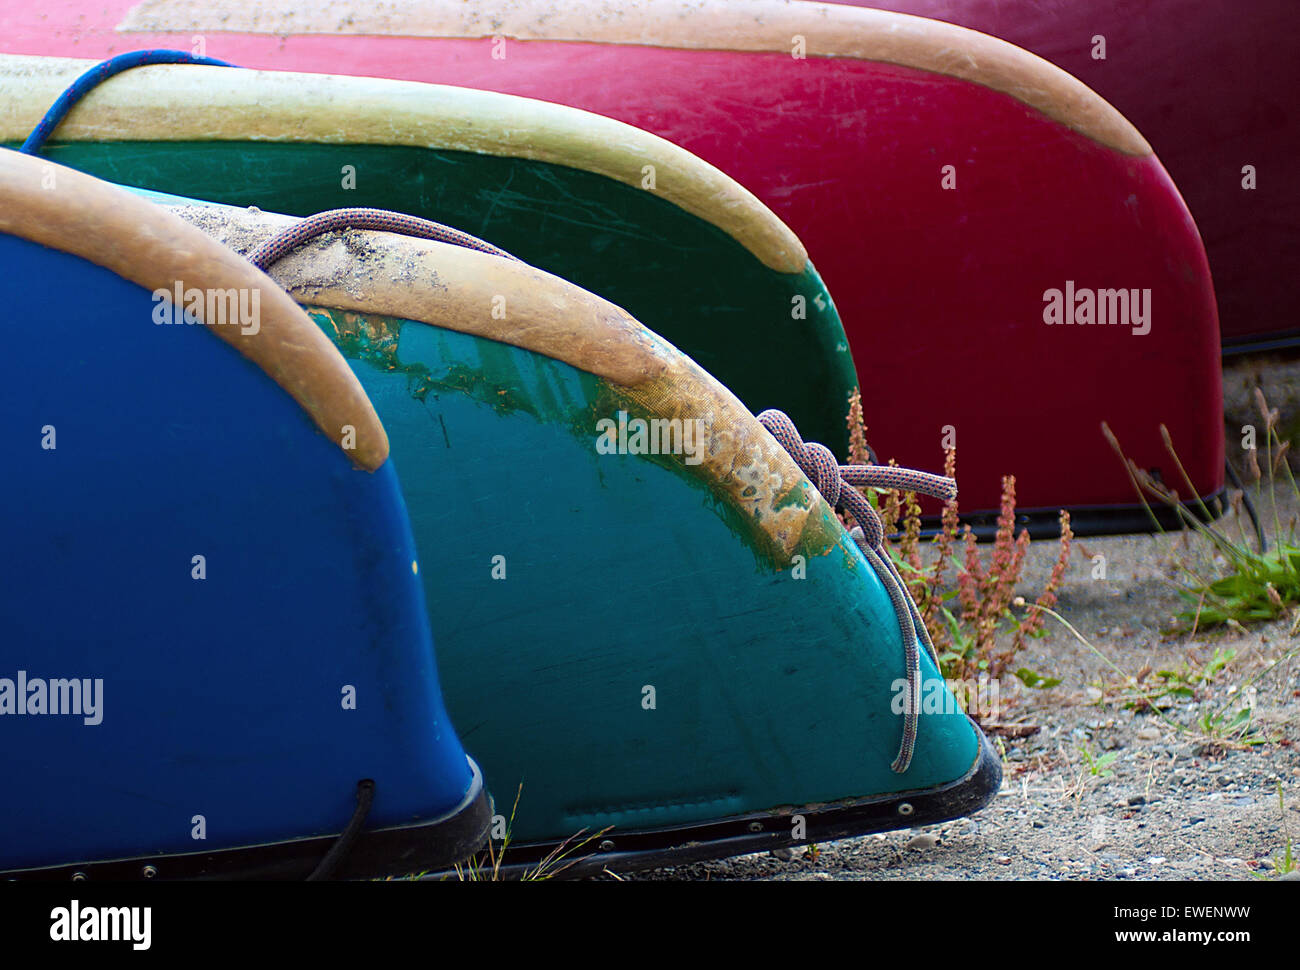 Canoes at Strathcona Park Lodge in Strathcona Provincial Park, Vancouver Island, British Columbia, Canada. Stock Photo